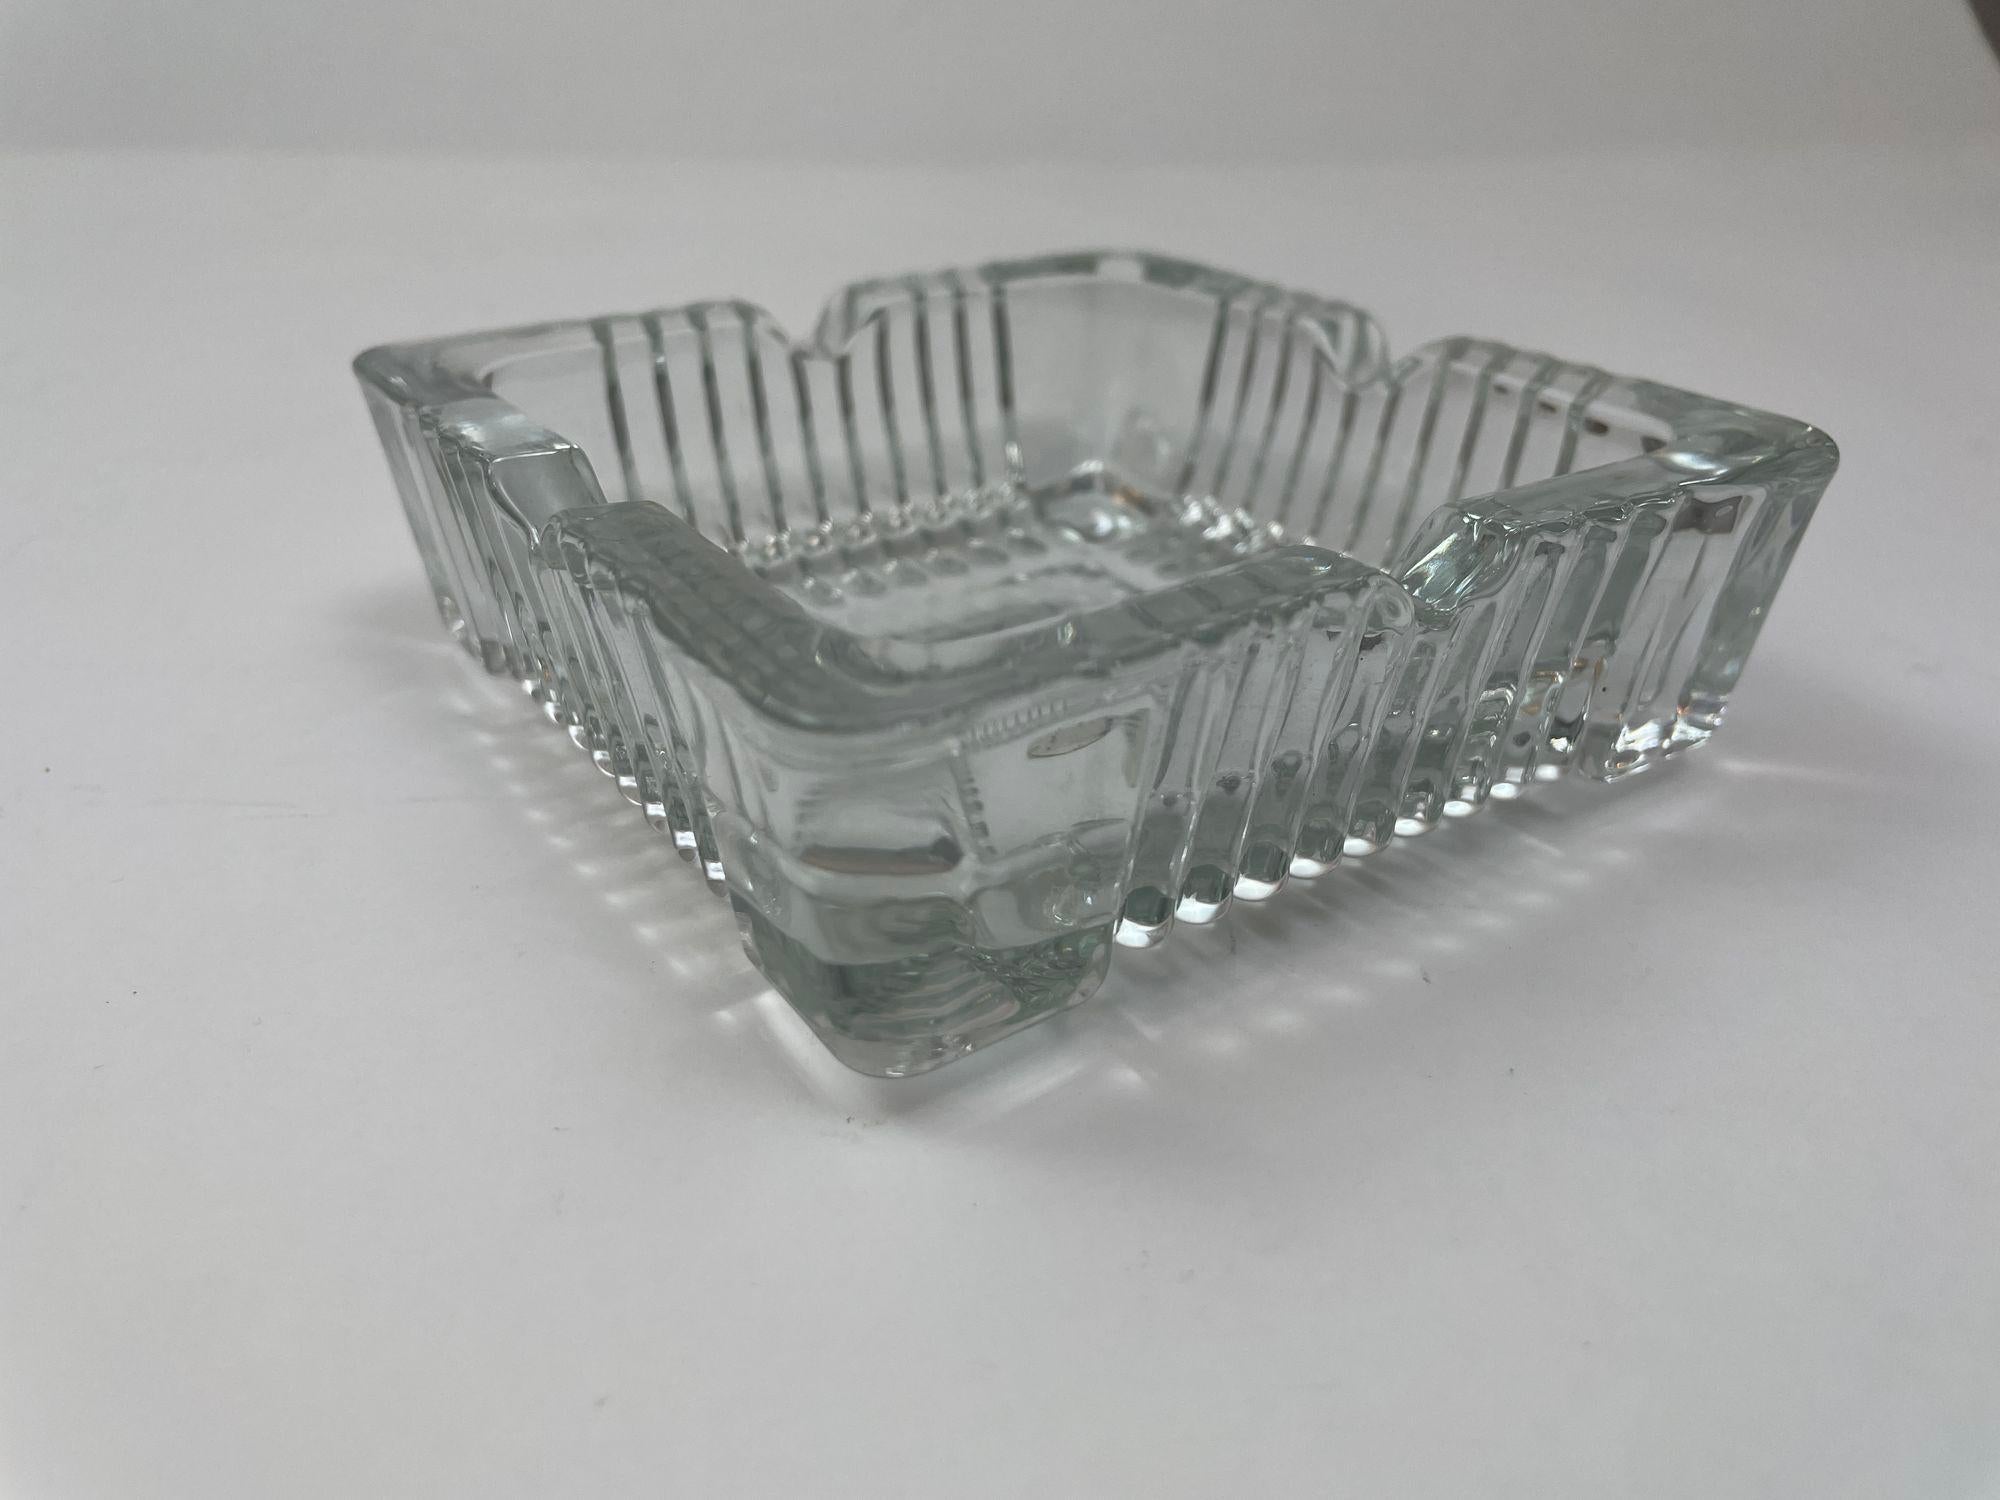 Cristal D'Arques Crystal Ashtray Trinket Dish France Cut Glass Square Catchall In Good Condition For Sale In North Hollywood, CA